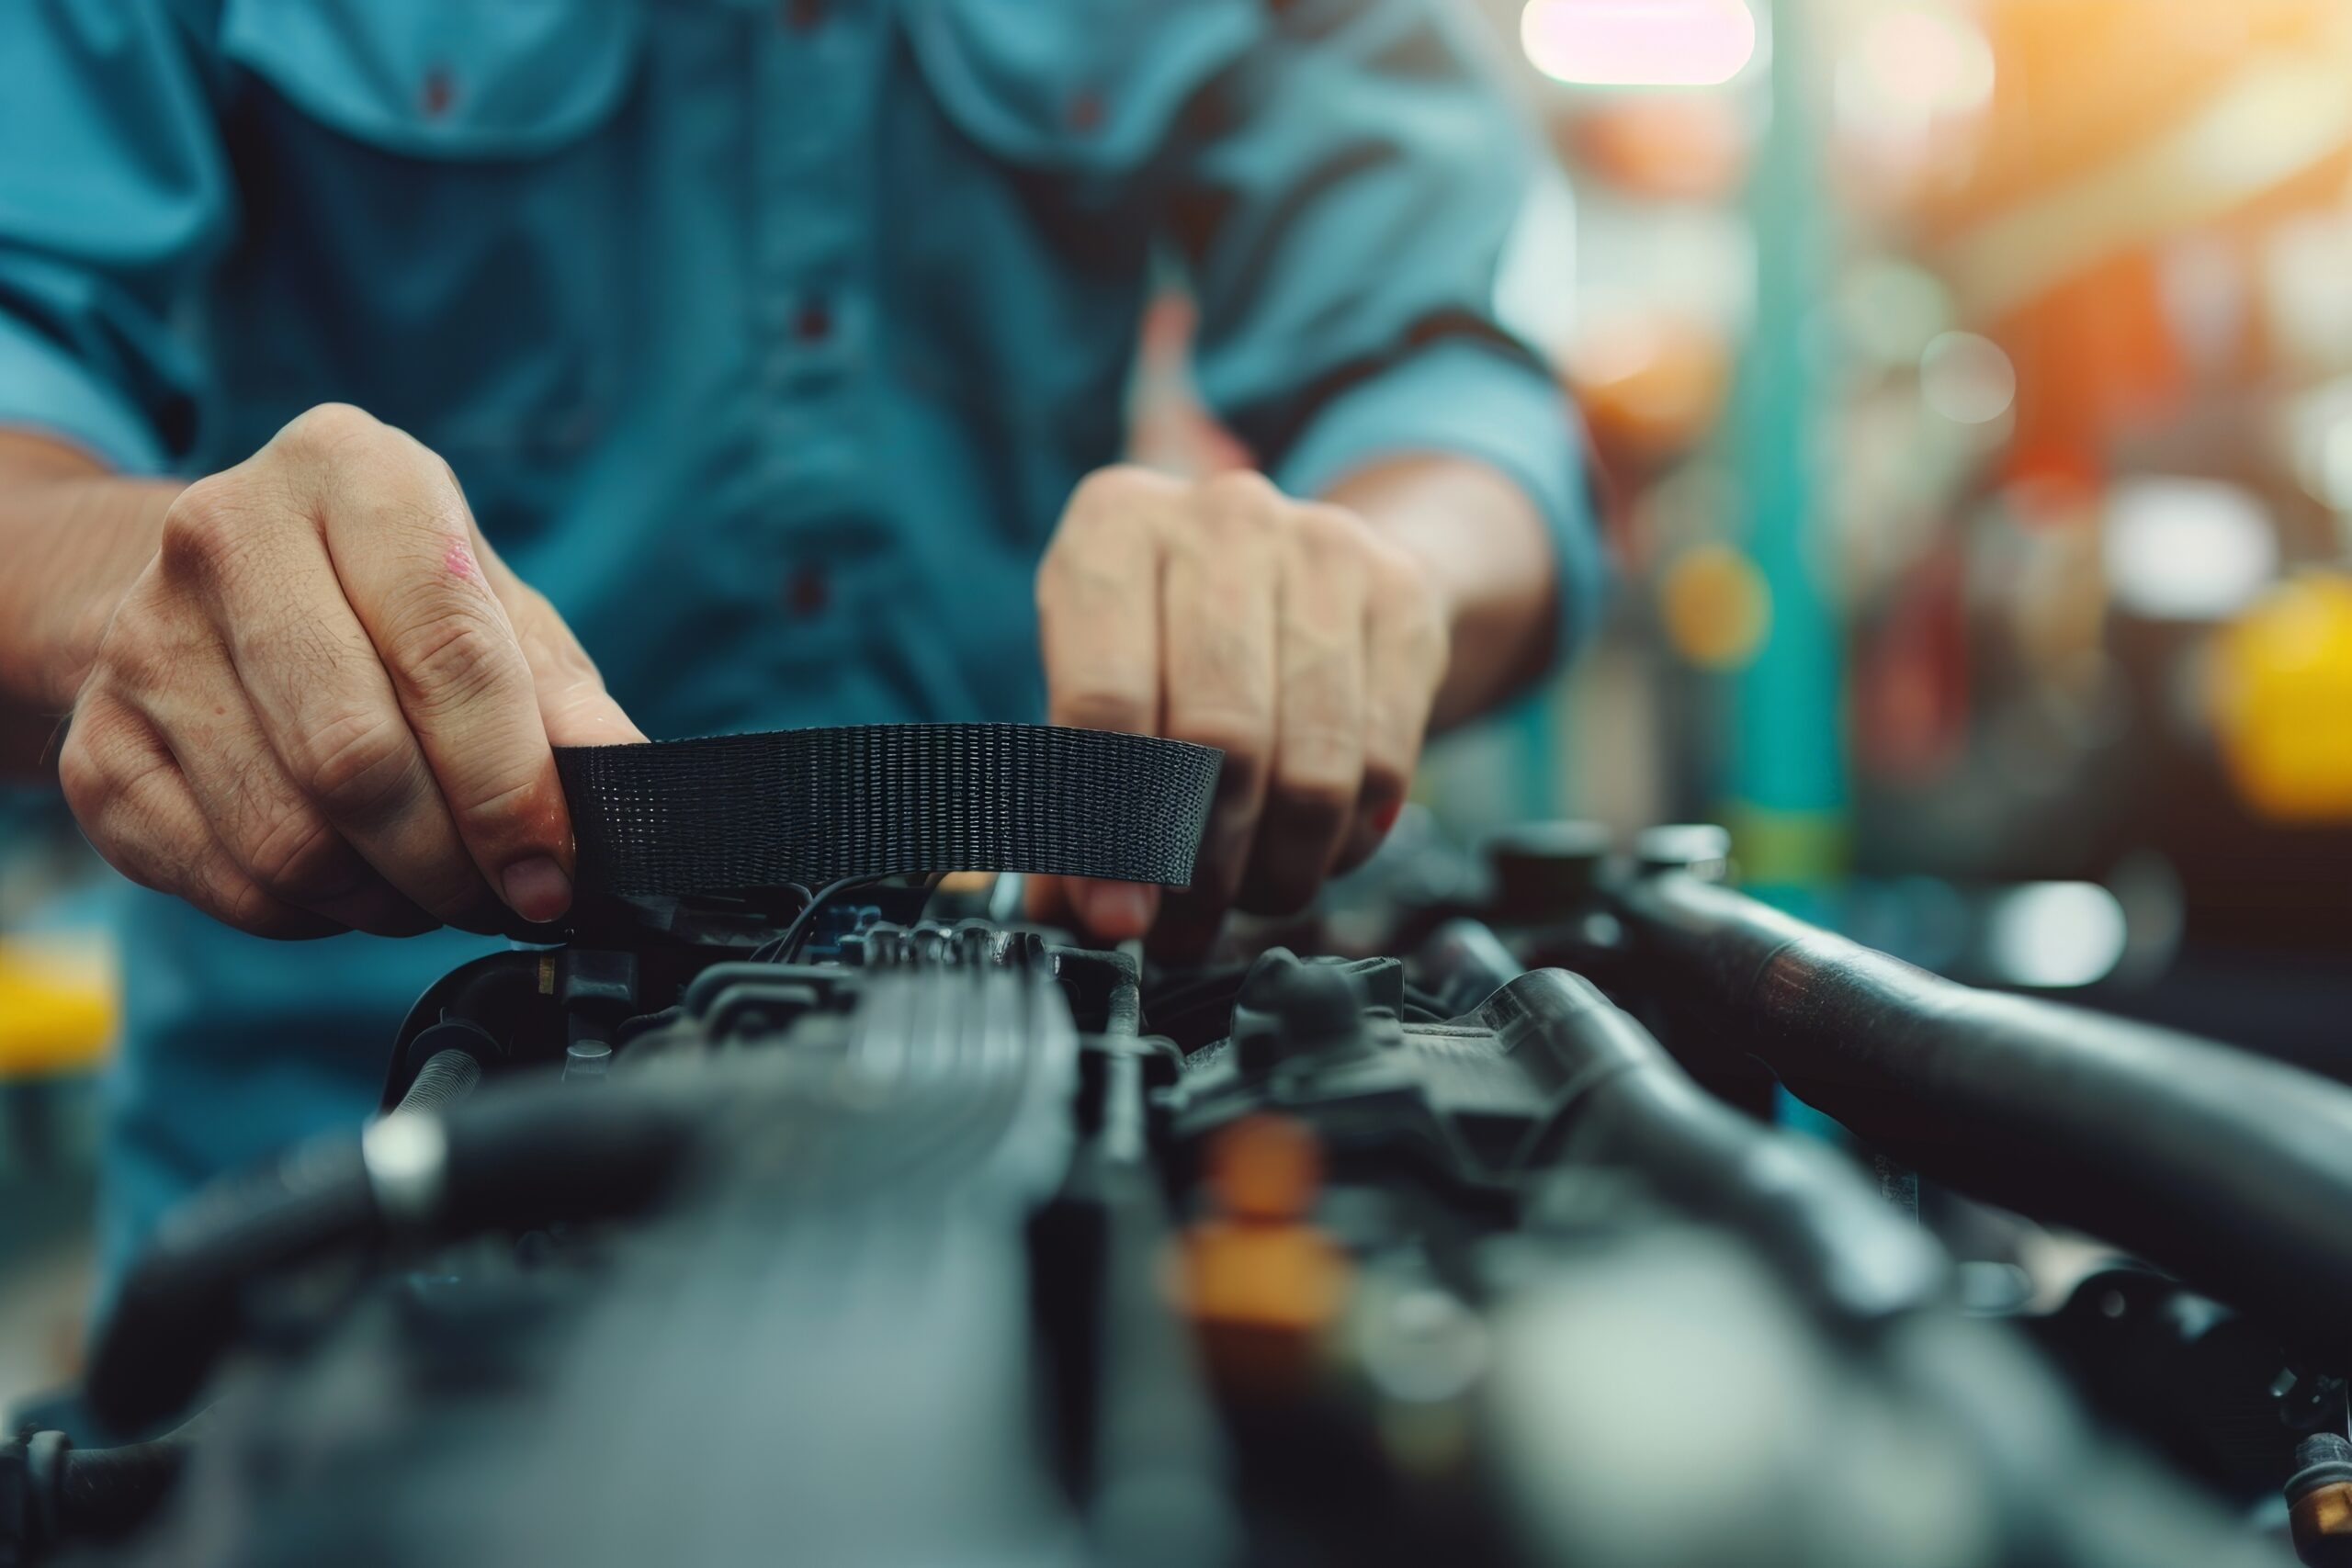 How Much Does a Timing Belt Replacement Cost?